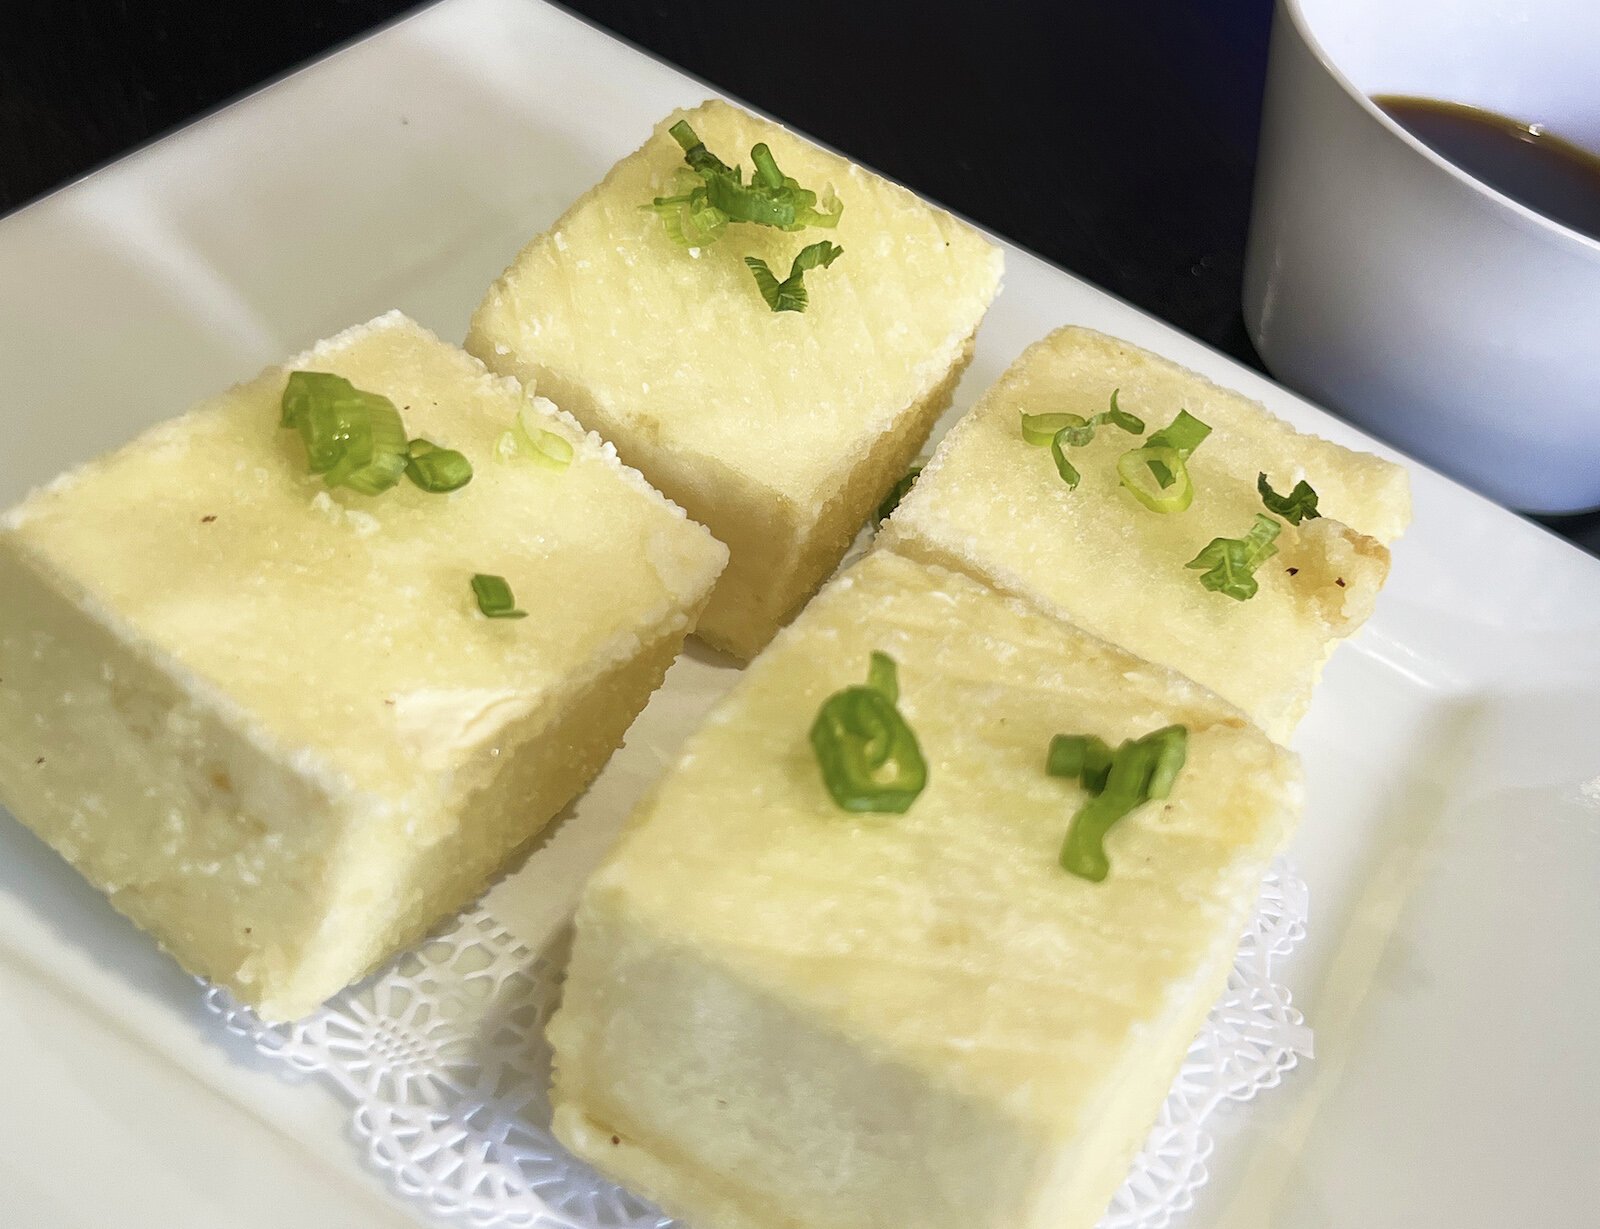 The tofu is served in thick squares encased in a fried, but delicate outer ridge.